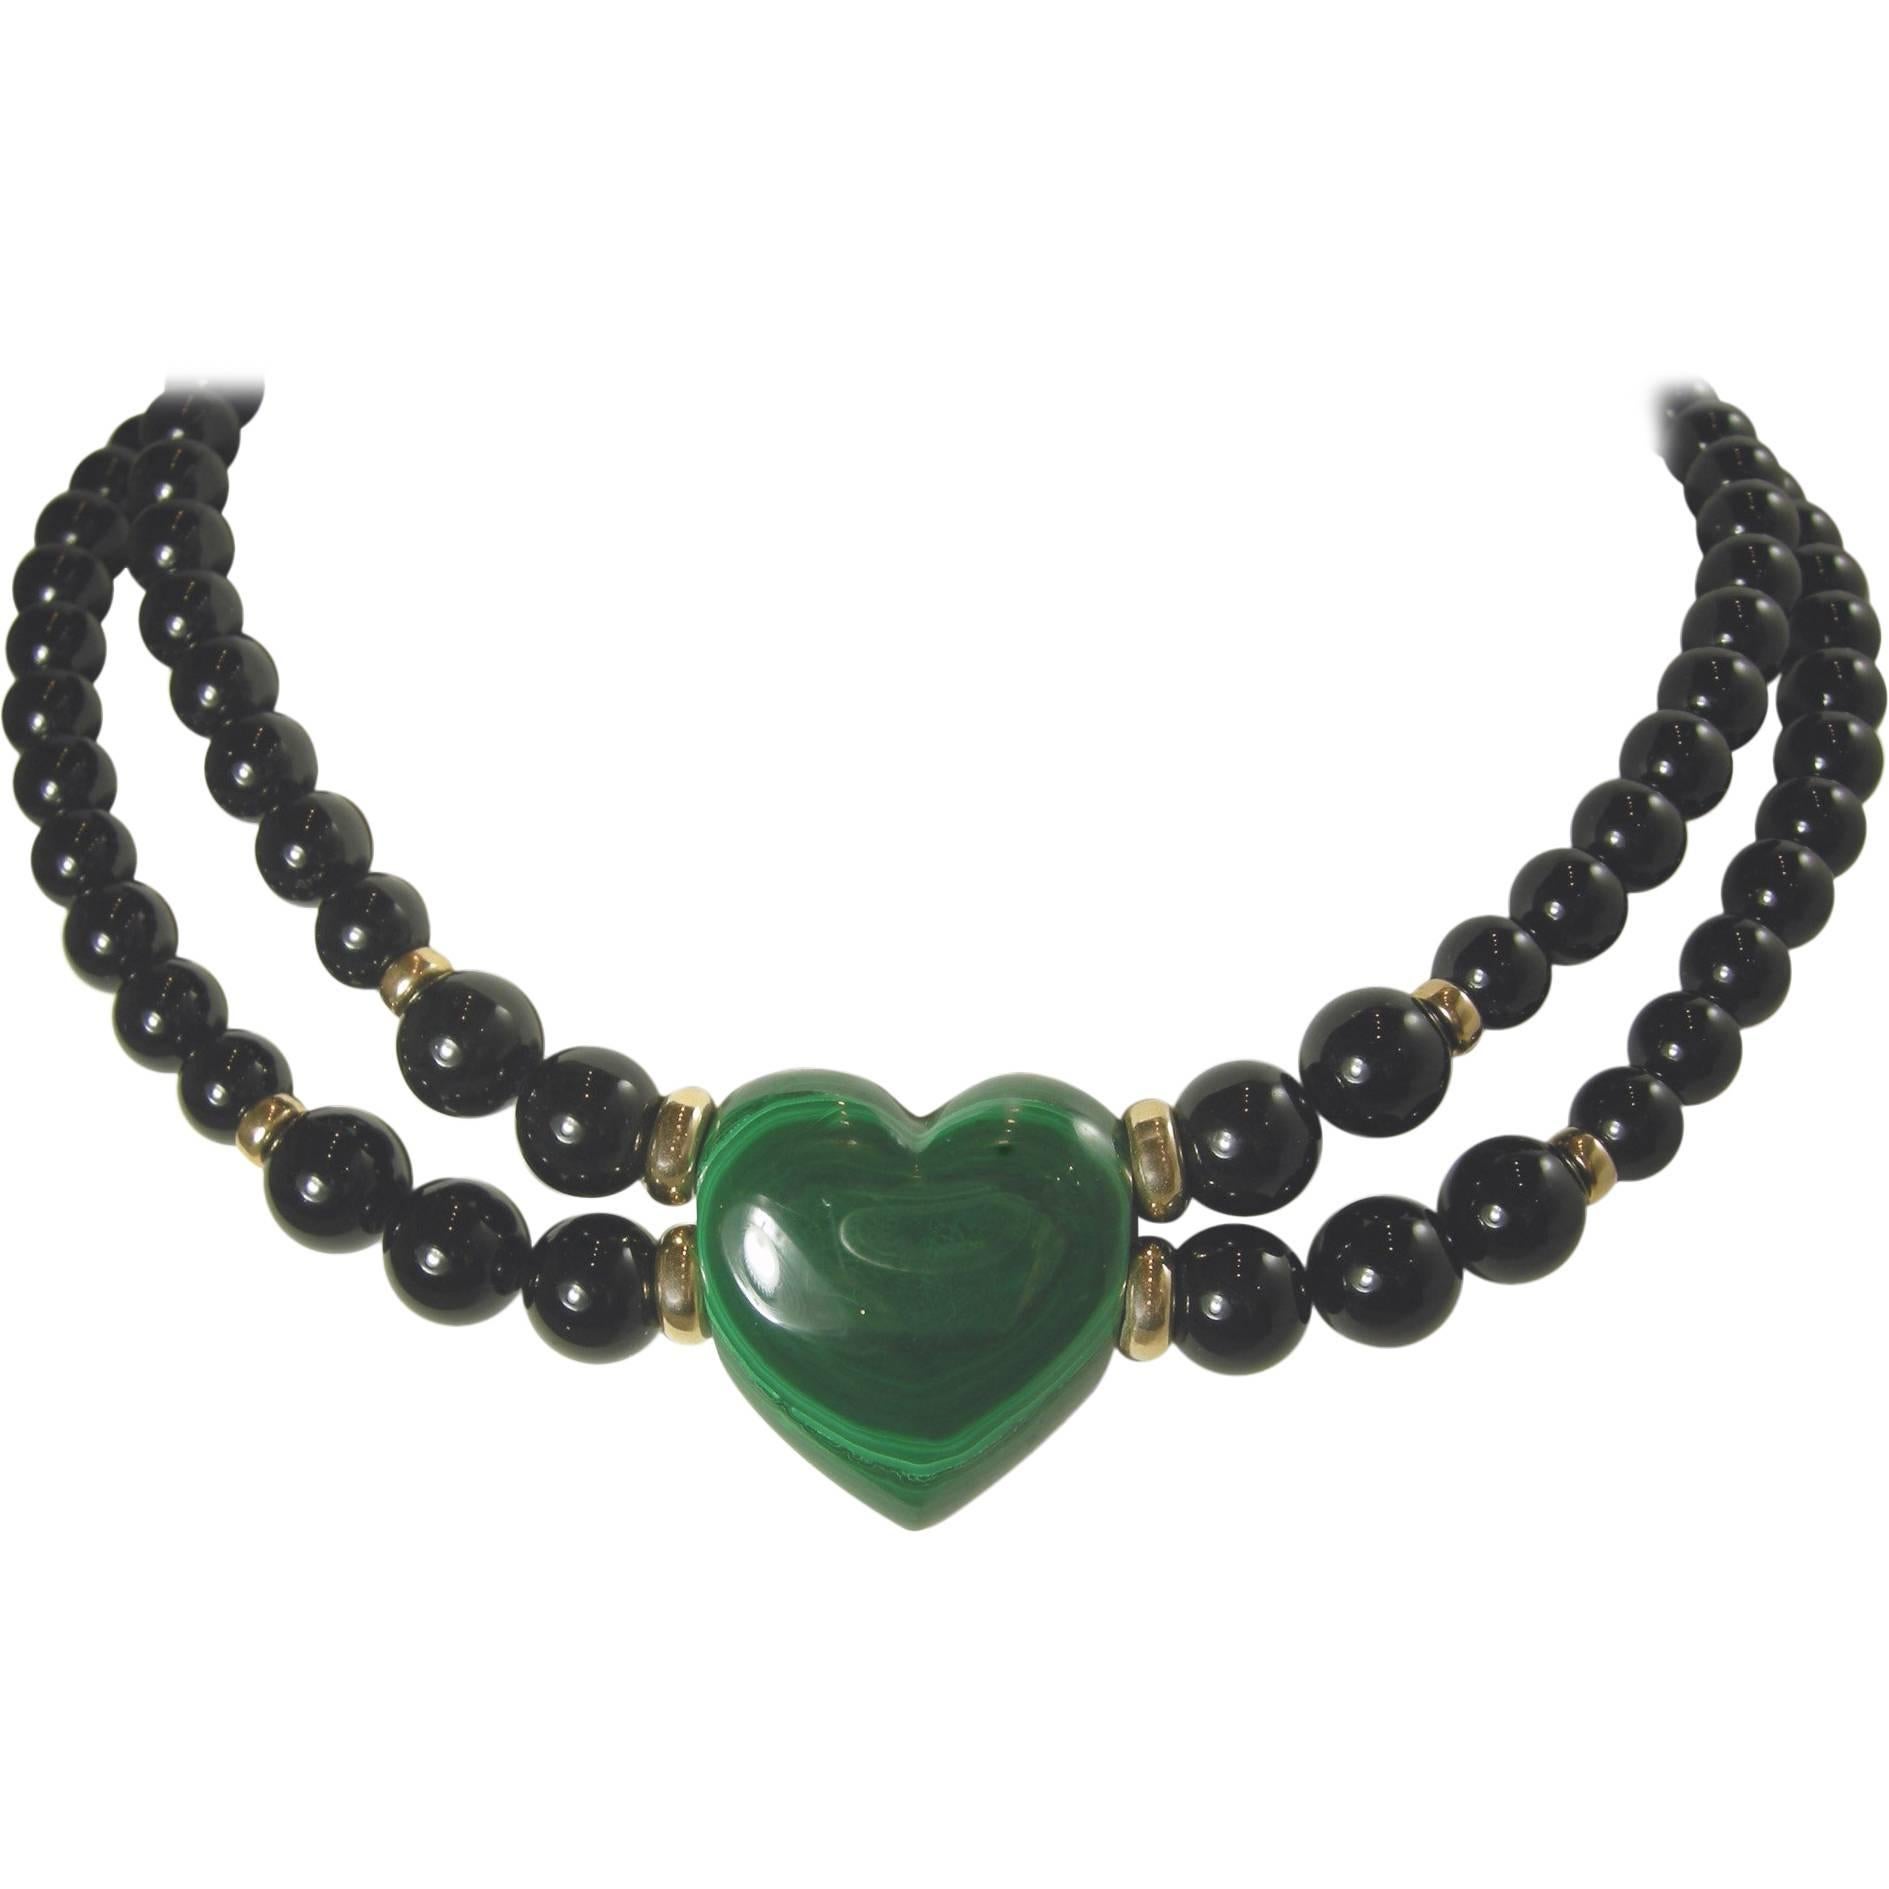 Vintage 14KT Black Onyx and Green Malachite Heart Necklace